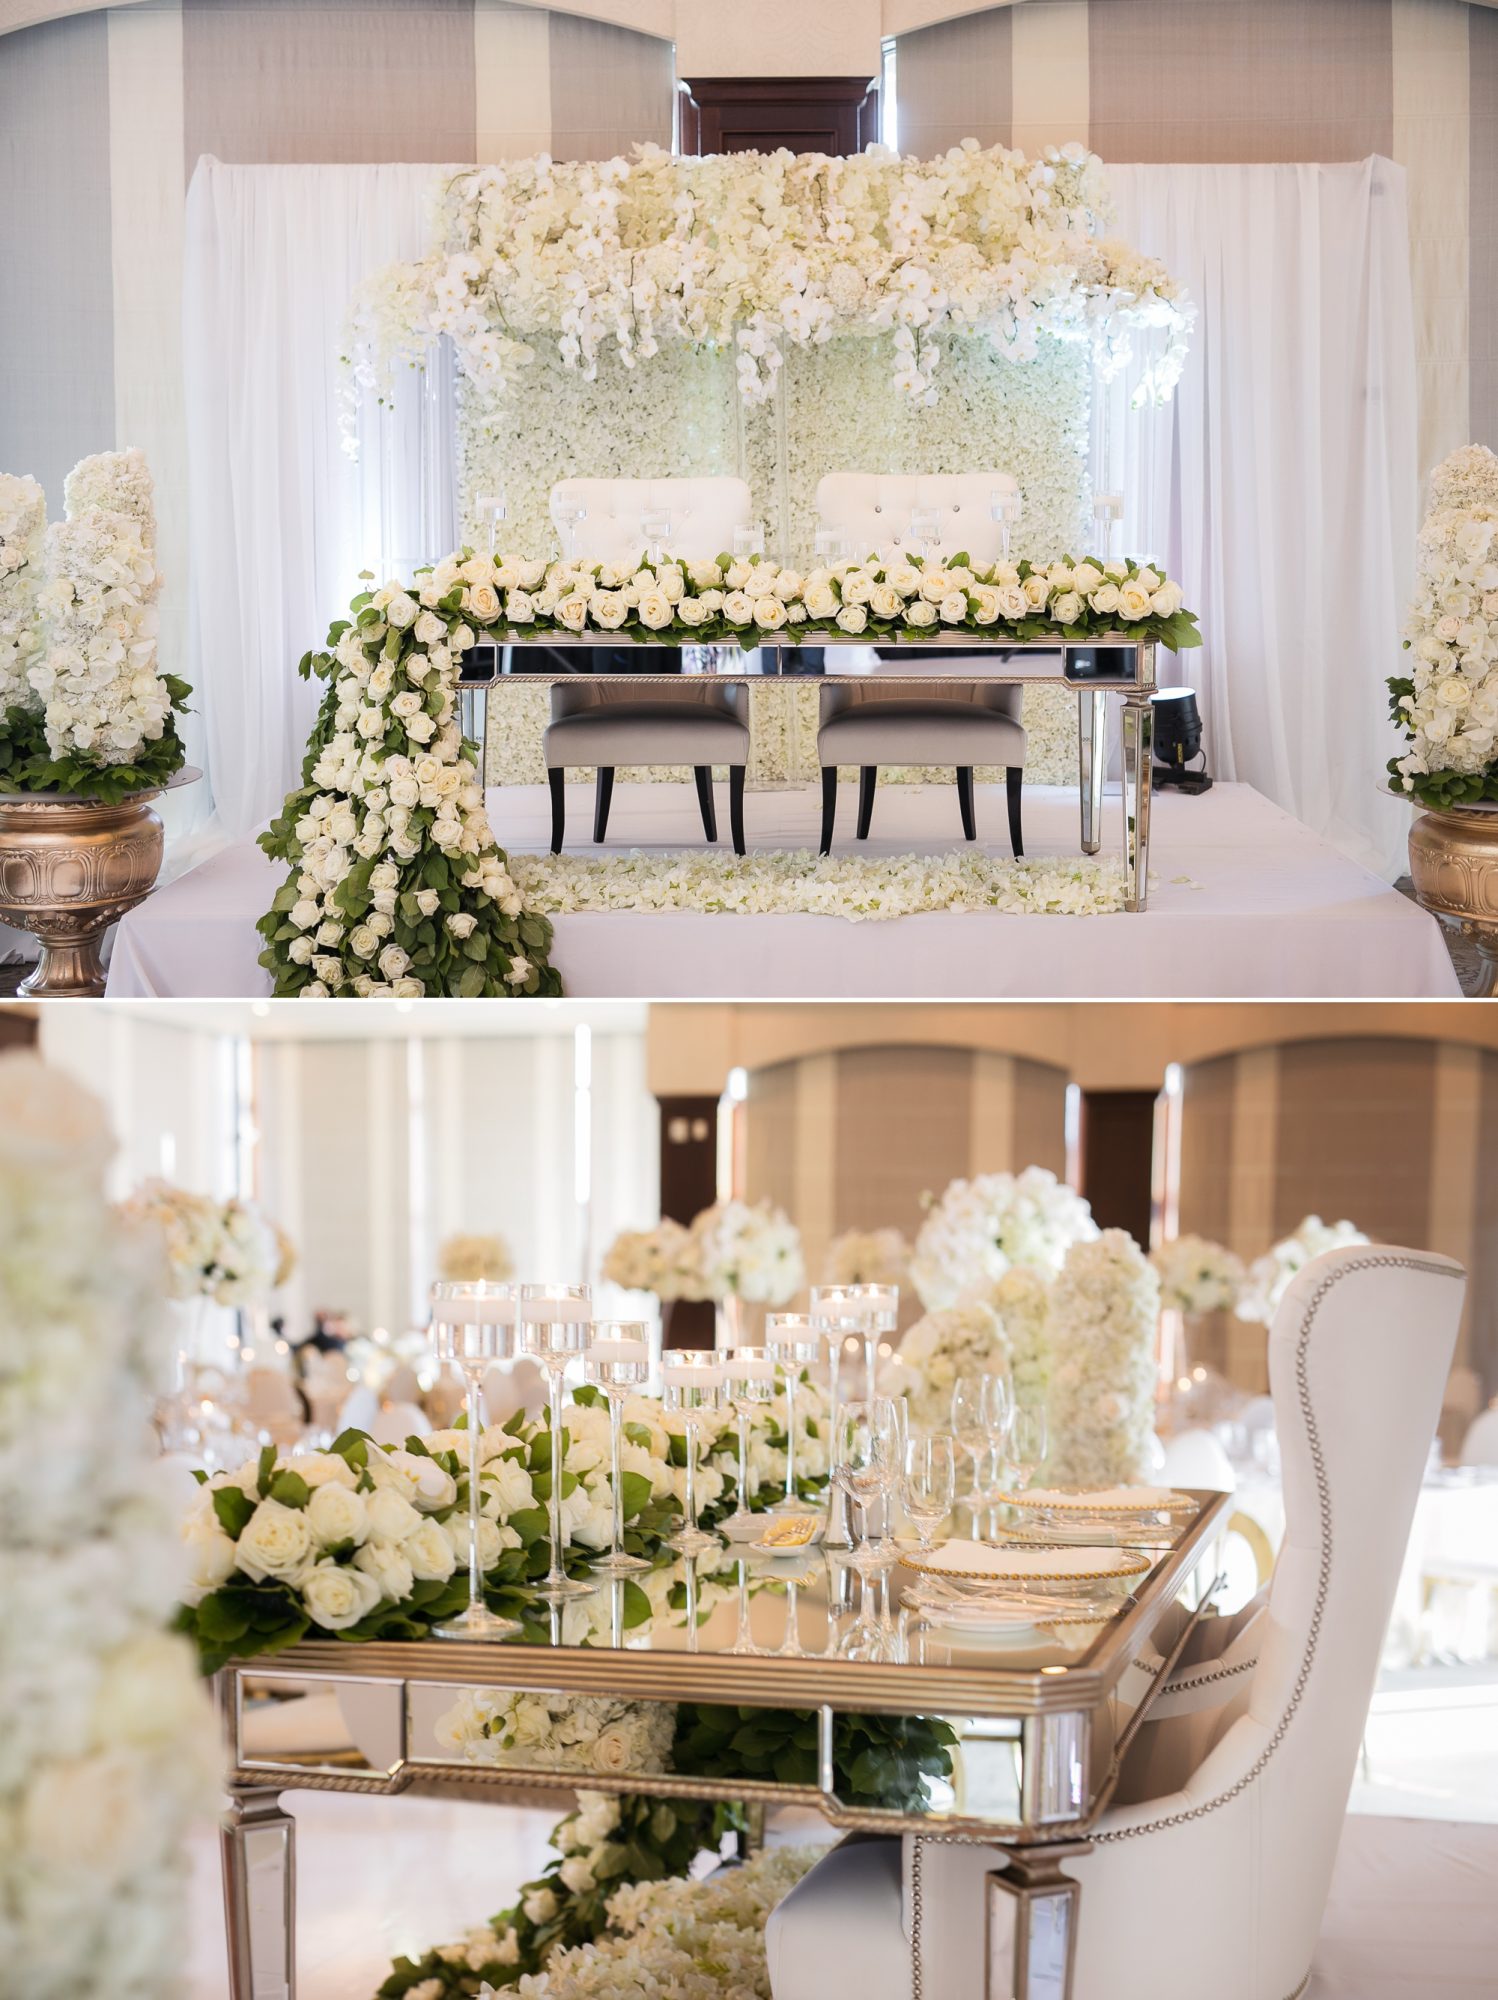 Toronto Wedding at Eagles Nest. Detailed shots of the wedding decor and head table seating decorated by many flowers